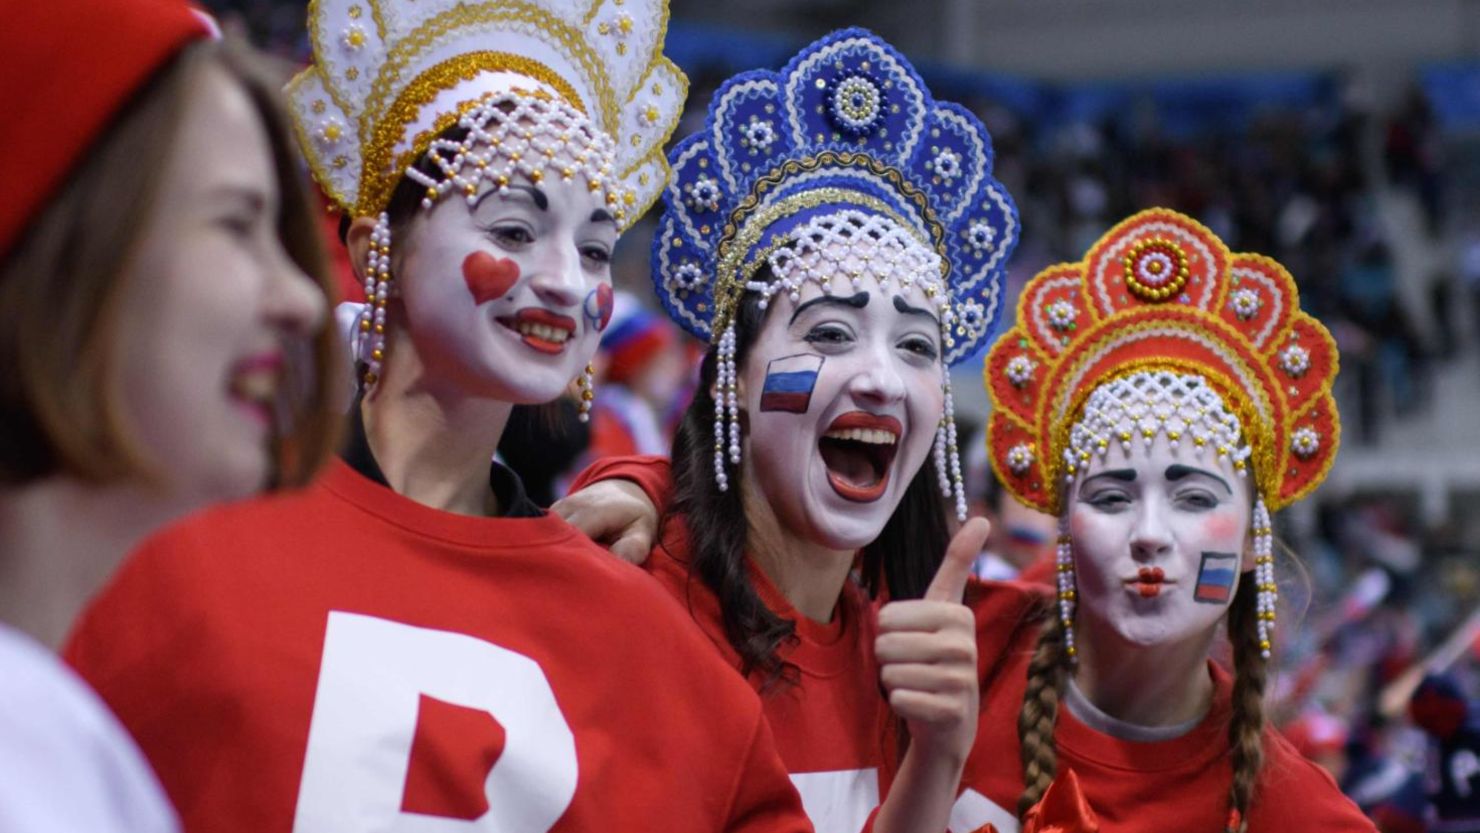 TOPSHOT - Fans cheers before the men's ice hockey preliminary round group B game between the Olympic Athletes from Russia and the United States during the Pyeongchang 2018 Winter Olympic Games at the Gangneung Hockey Centre in Gangneung on February 17, 2018. / AFP PHOTO / Ed JONES        (Photo credit should read ED JONES/AFP/Getty Images)